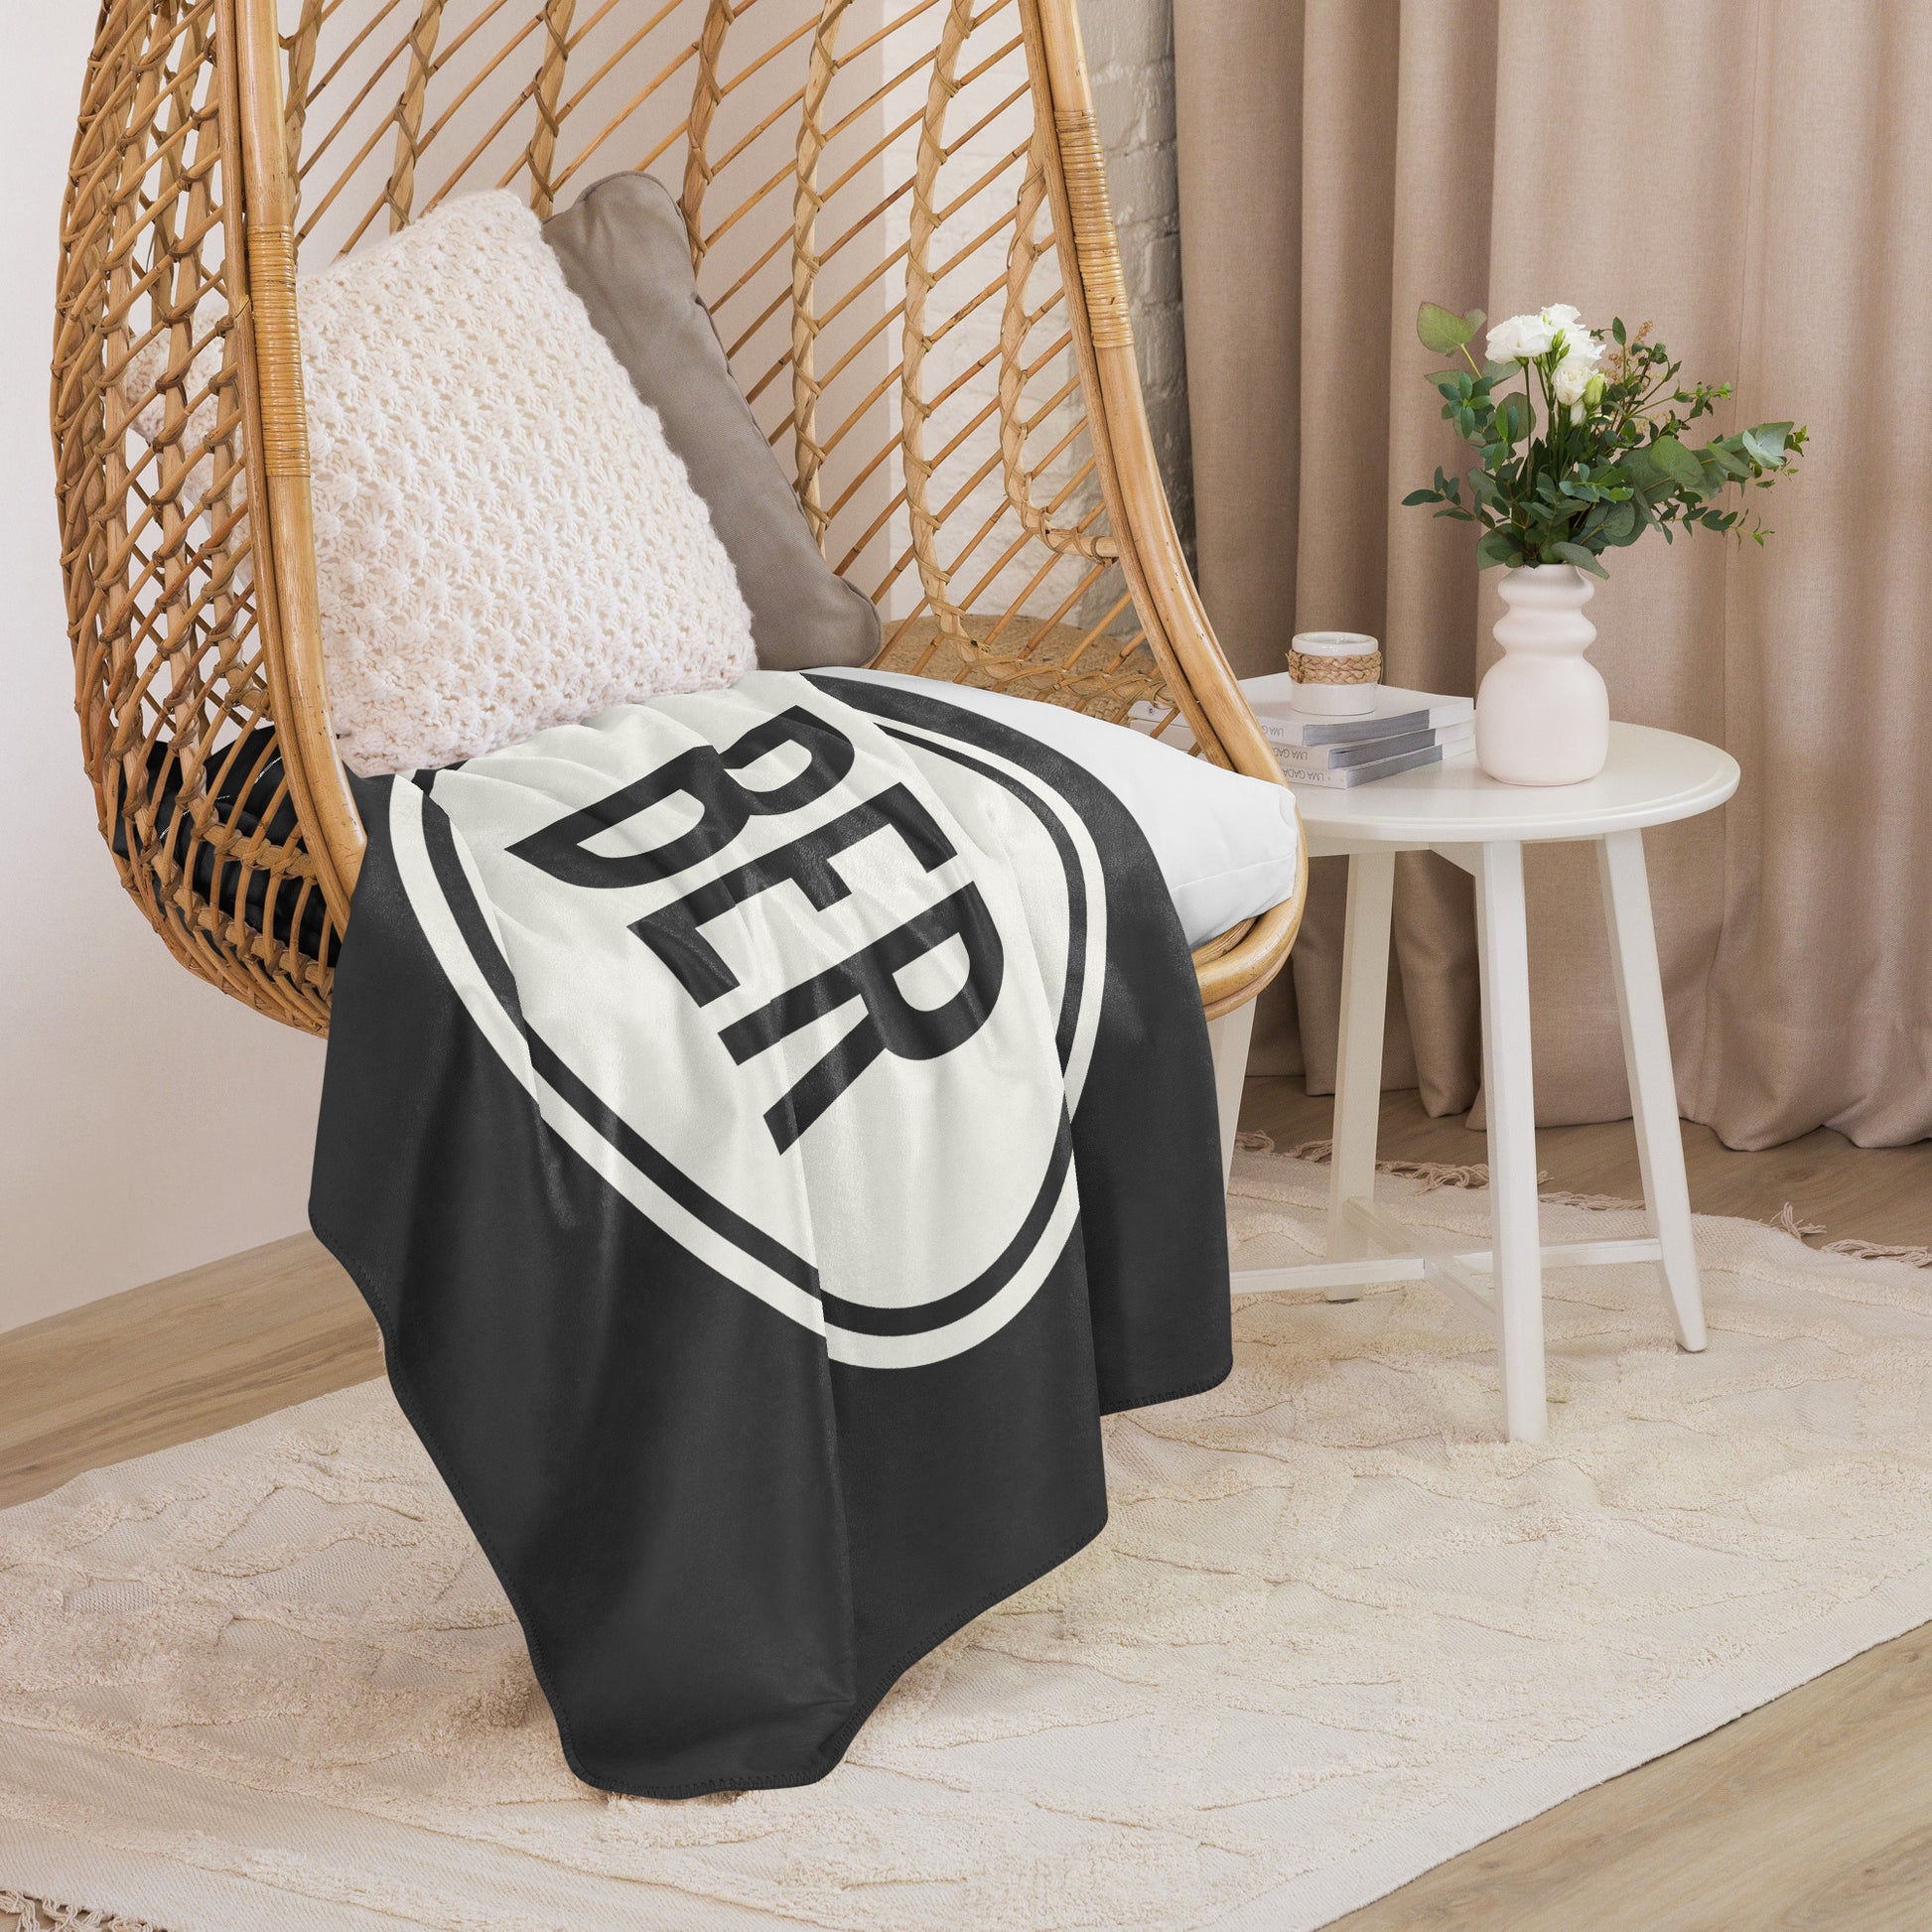 Unique Travel Gift Sherpa Blanket - White Oval • BER Berlin • YHM Designs - Image 06